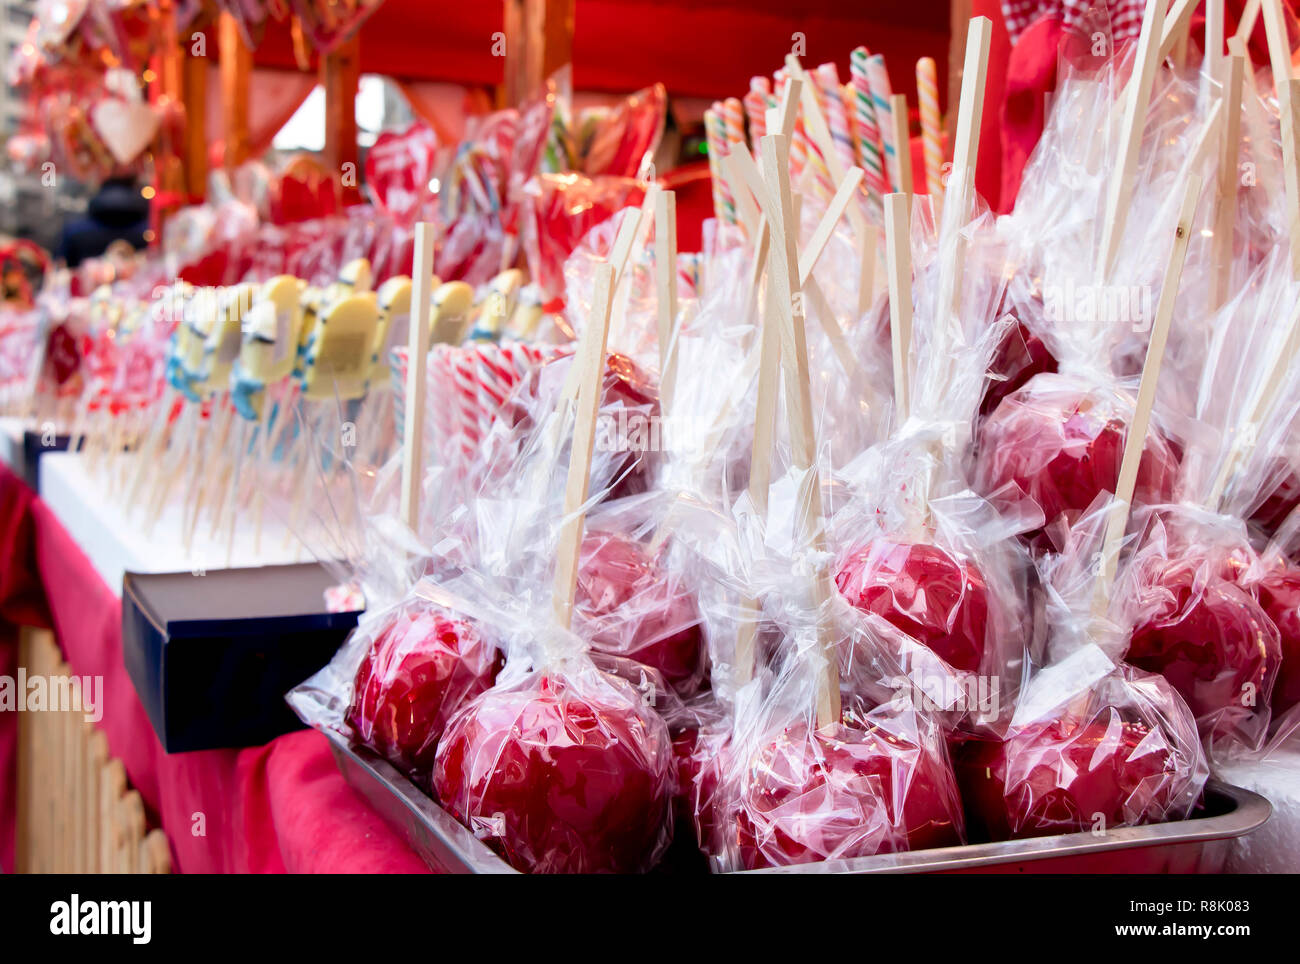 Red glazed candy apples wrapped in cellophane on display in Christmas street fair market Stock Photo